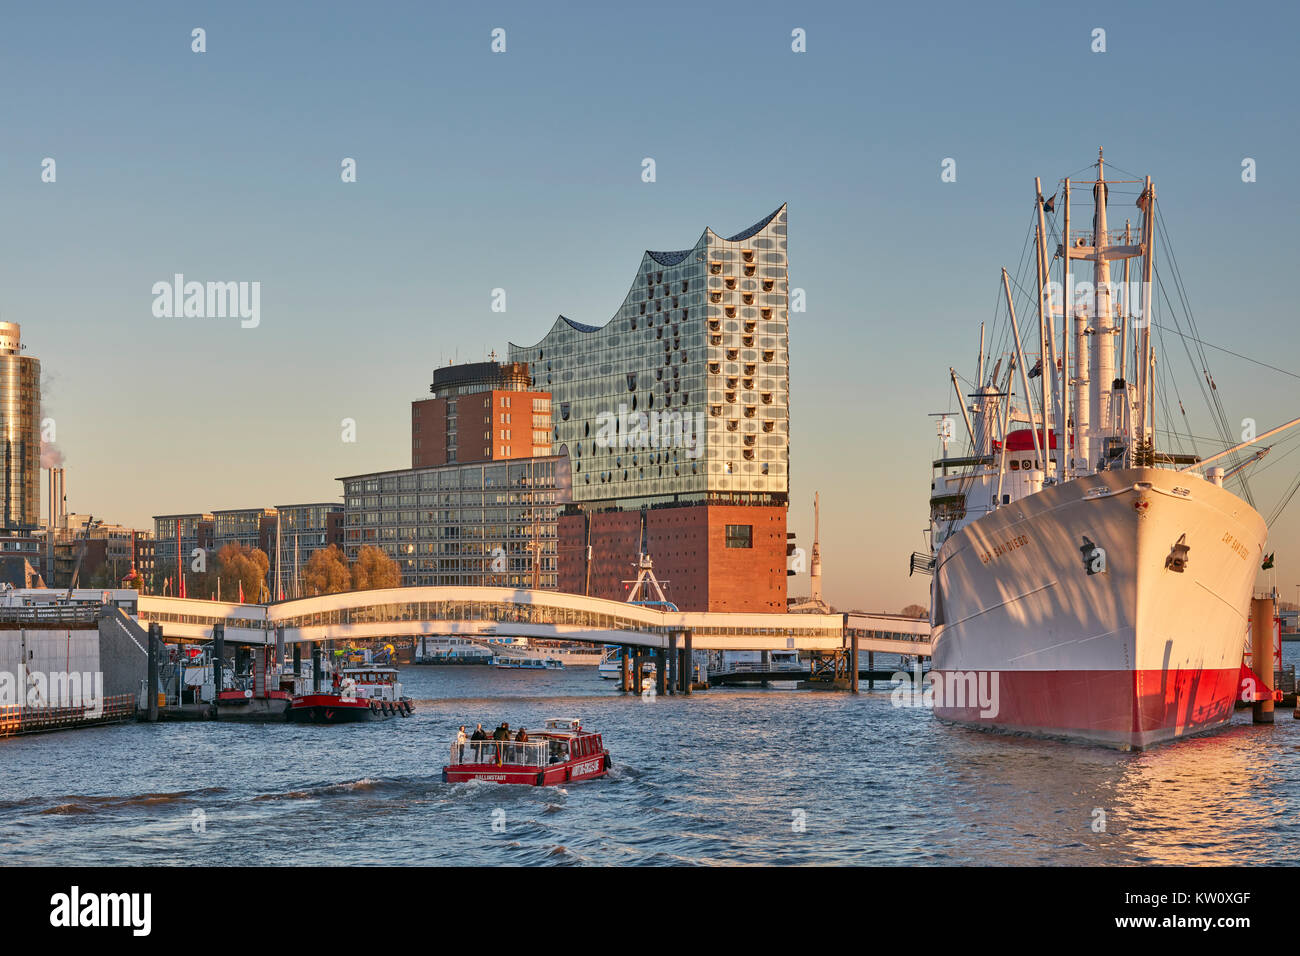 Concert hall Elbphilharmonie and historic cargo ship Cap San Diego at the River Elbe in the harbour of Hamburg, Germany Stock Photo